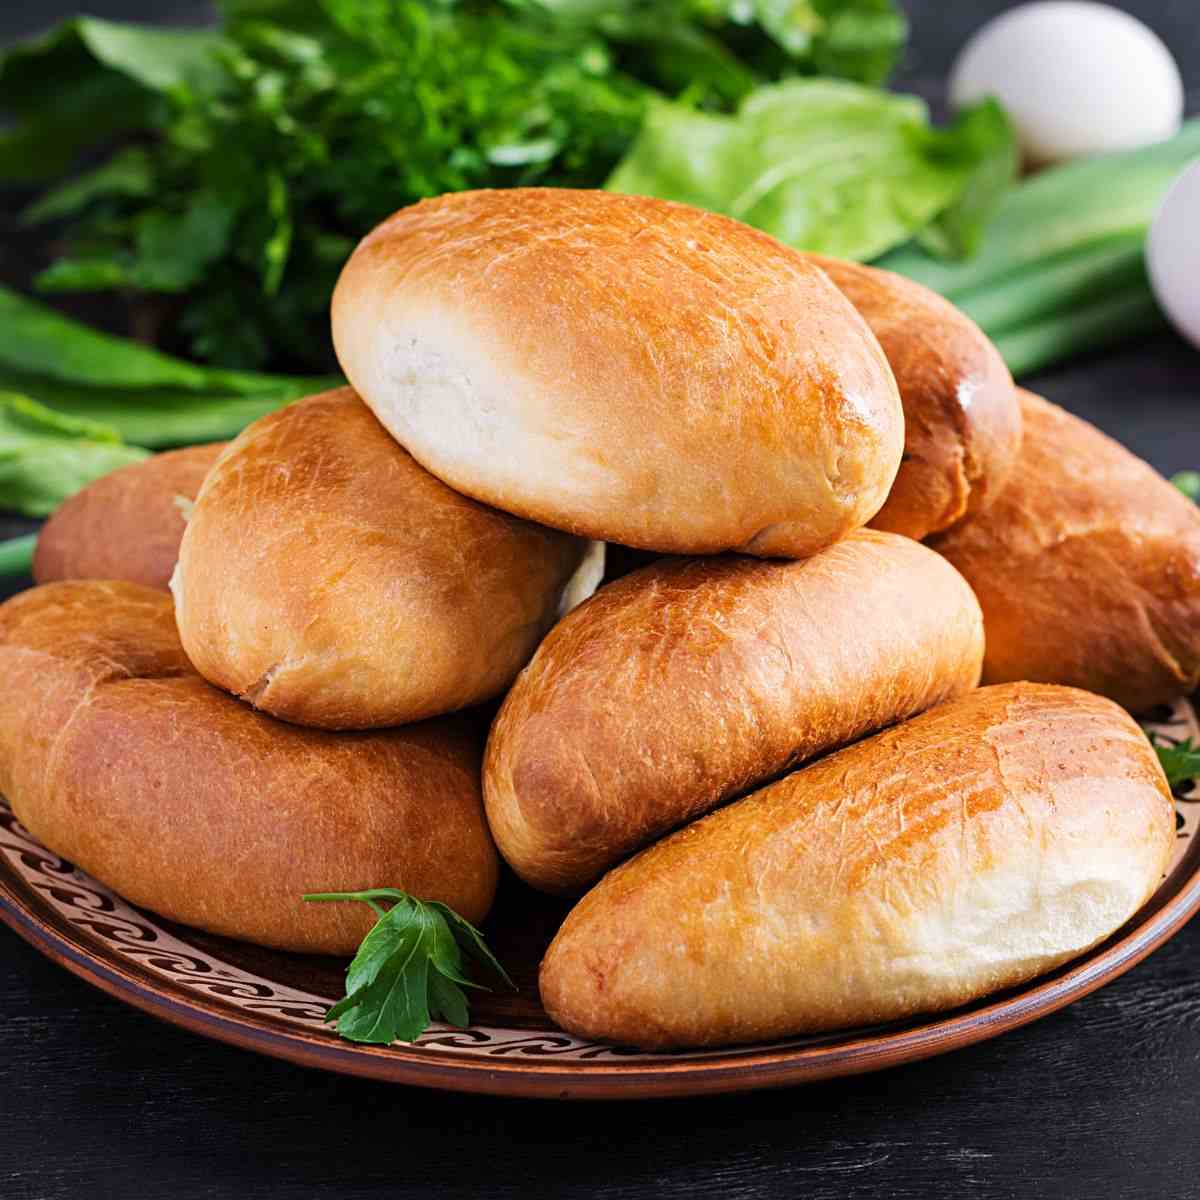 Piroshki on a plate with greens in the background.